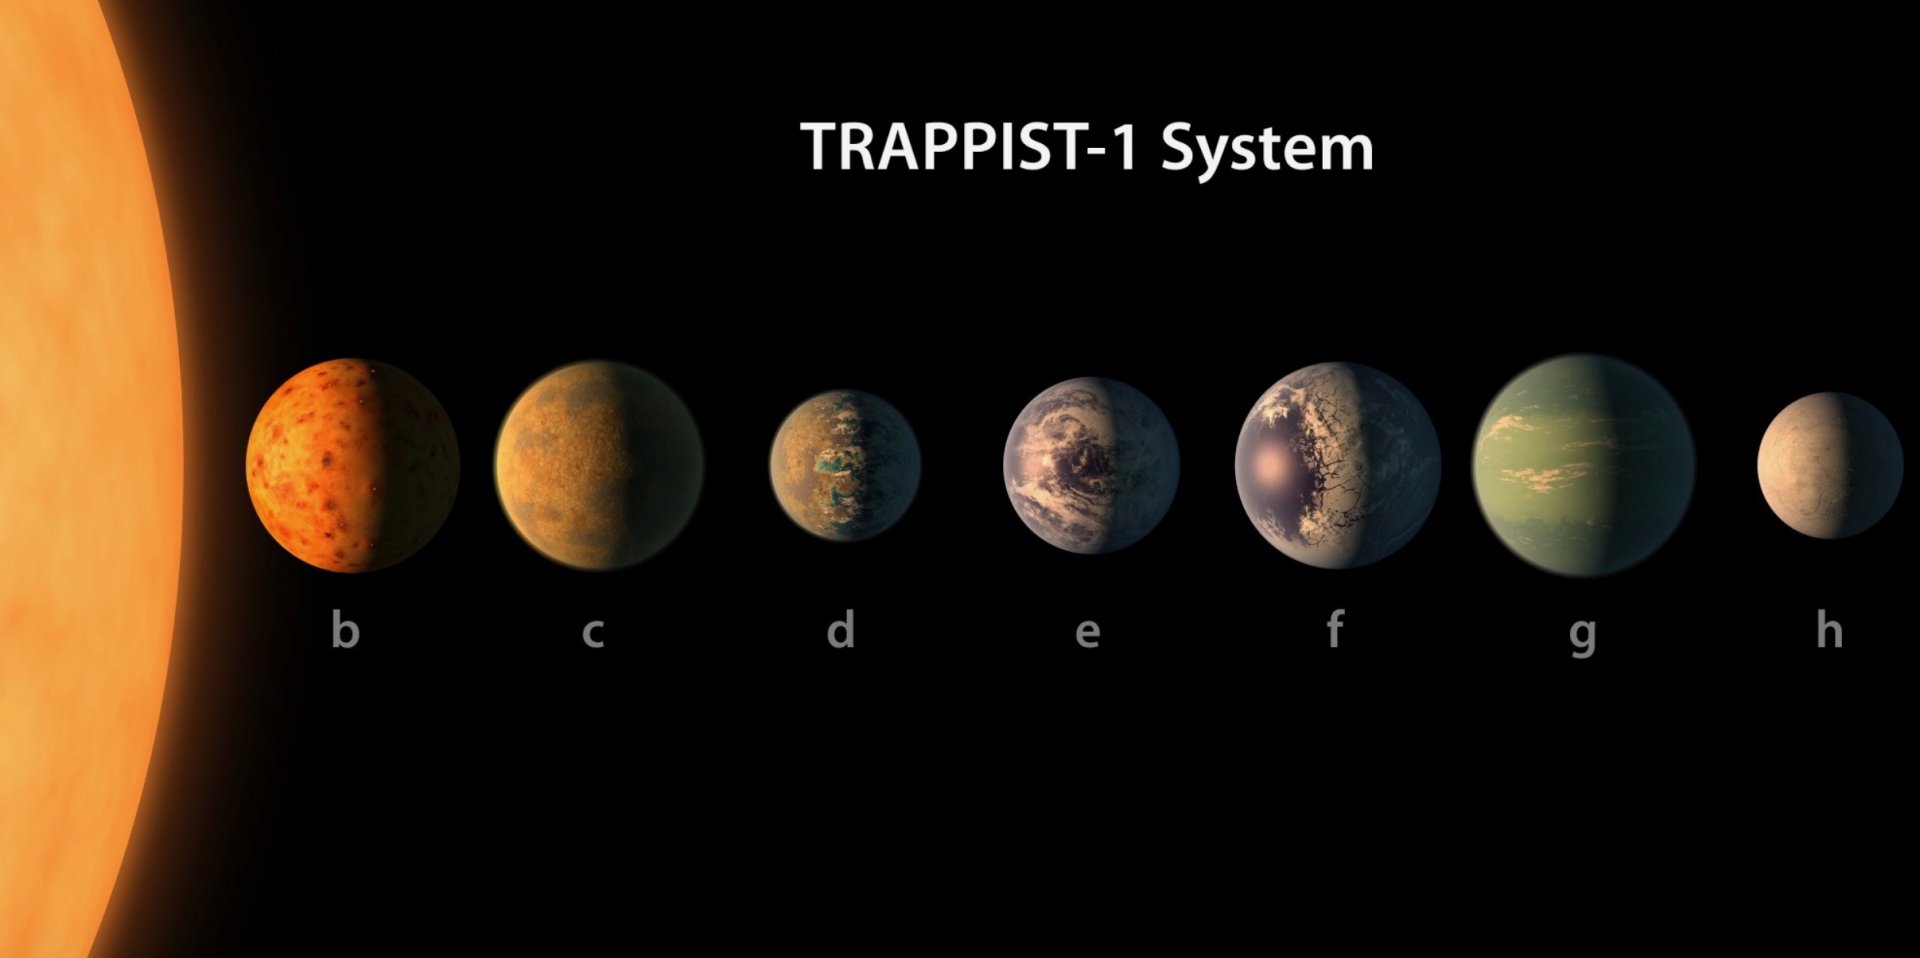 Astronomer: to planeten system TRAPPIST-1 beboelige